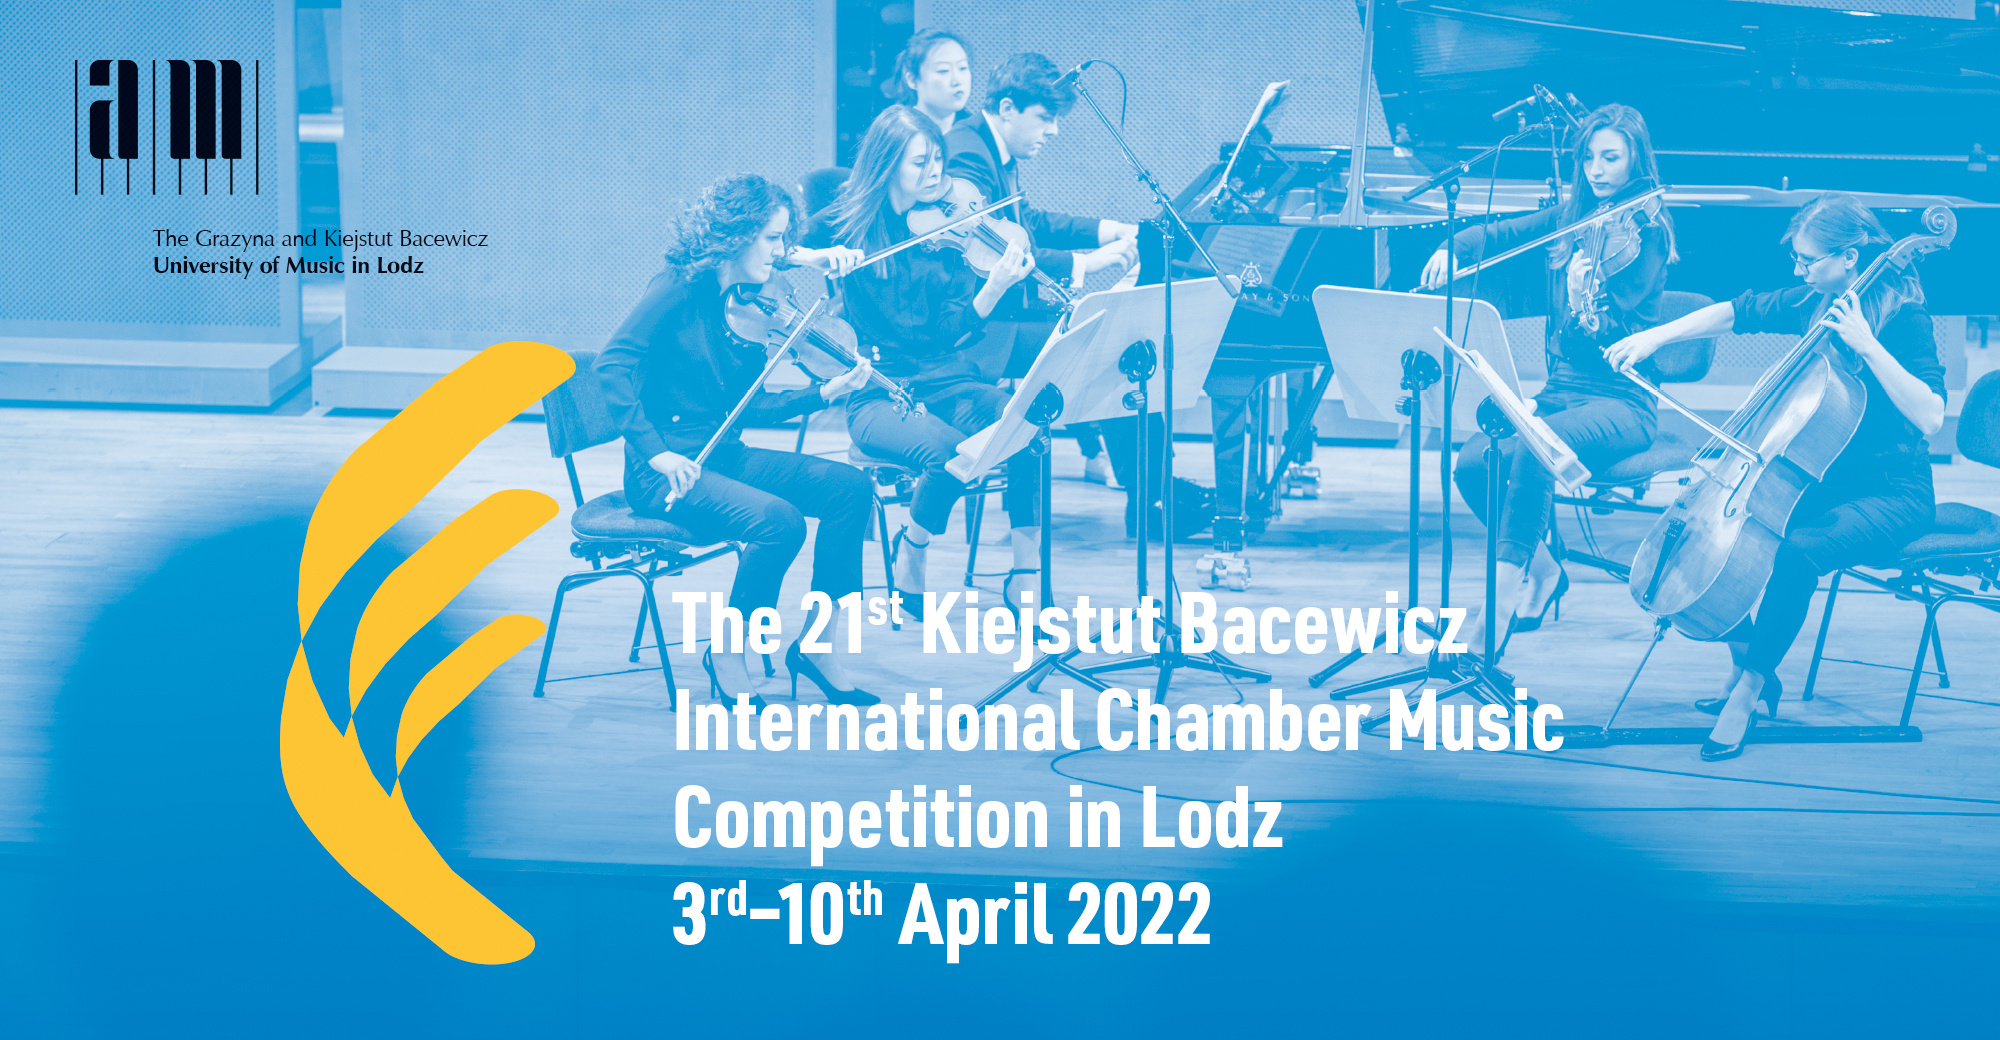 The 21st Kiejstut Bacewicz International Chamber Music Competition in Lodz